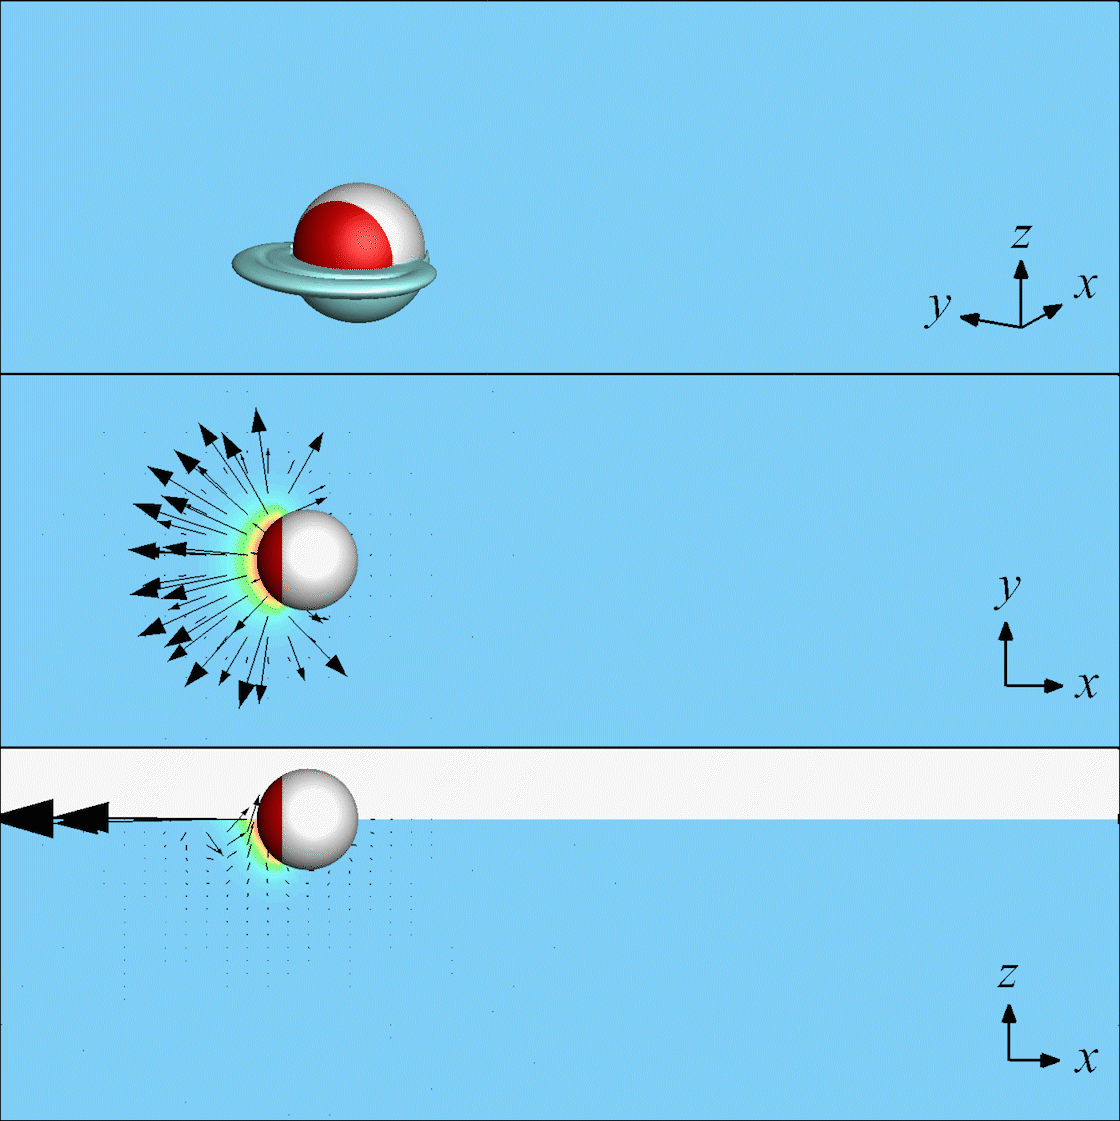 An animated gif that shows three round objects moving on the line between fluids. The gif is used to demonstrate propulsion by a surfing object.